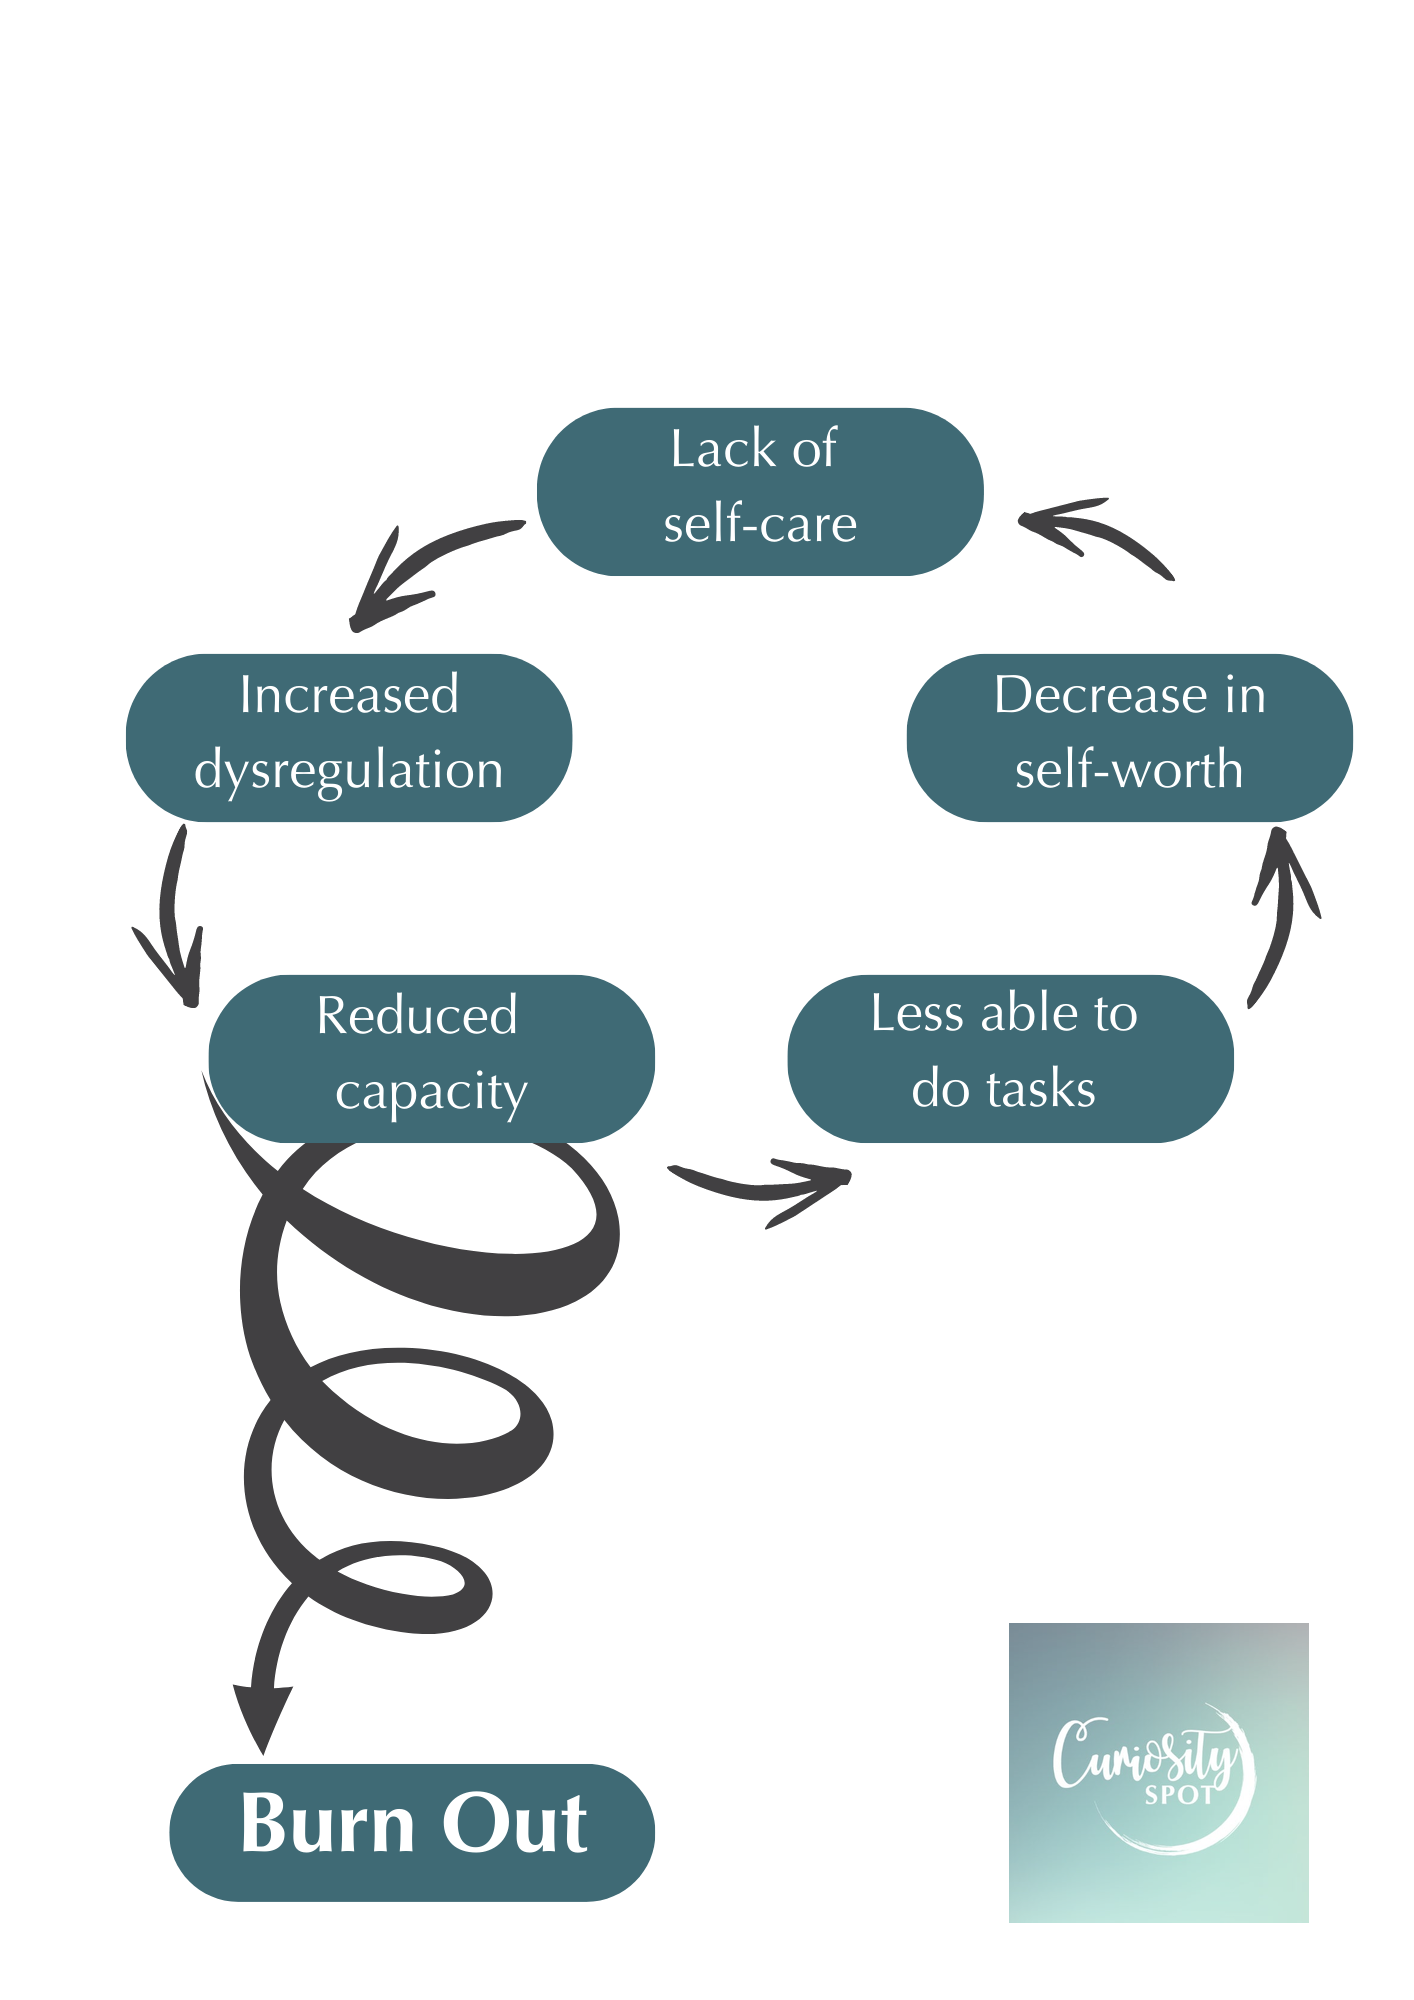 Lack of self care to increased dysregulation to reduced capacity to less able to do tasks to decrease in self-worth in a downward spiral leading to burnout